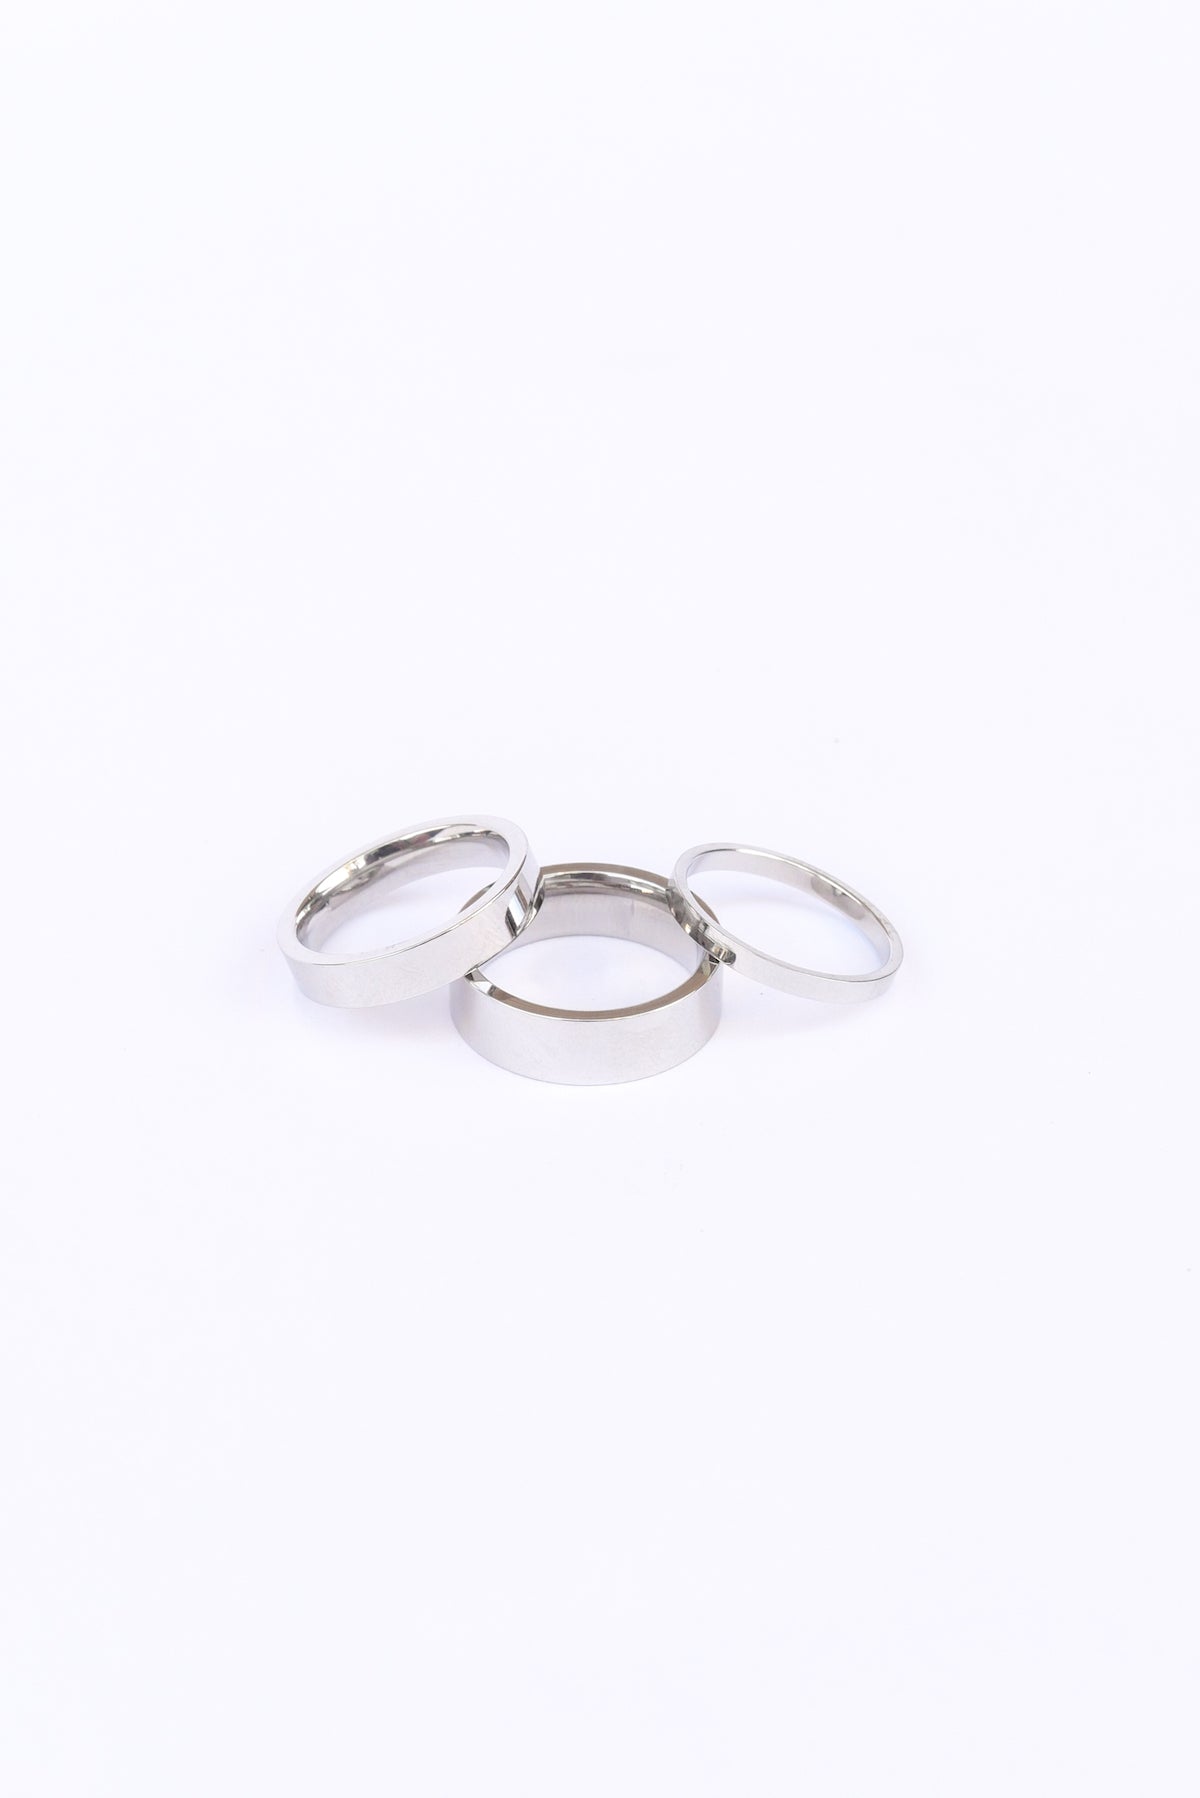 Silver banded Amor ring set on a white backdrop